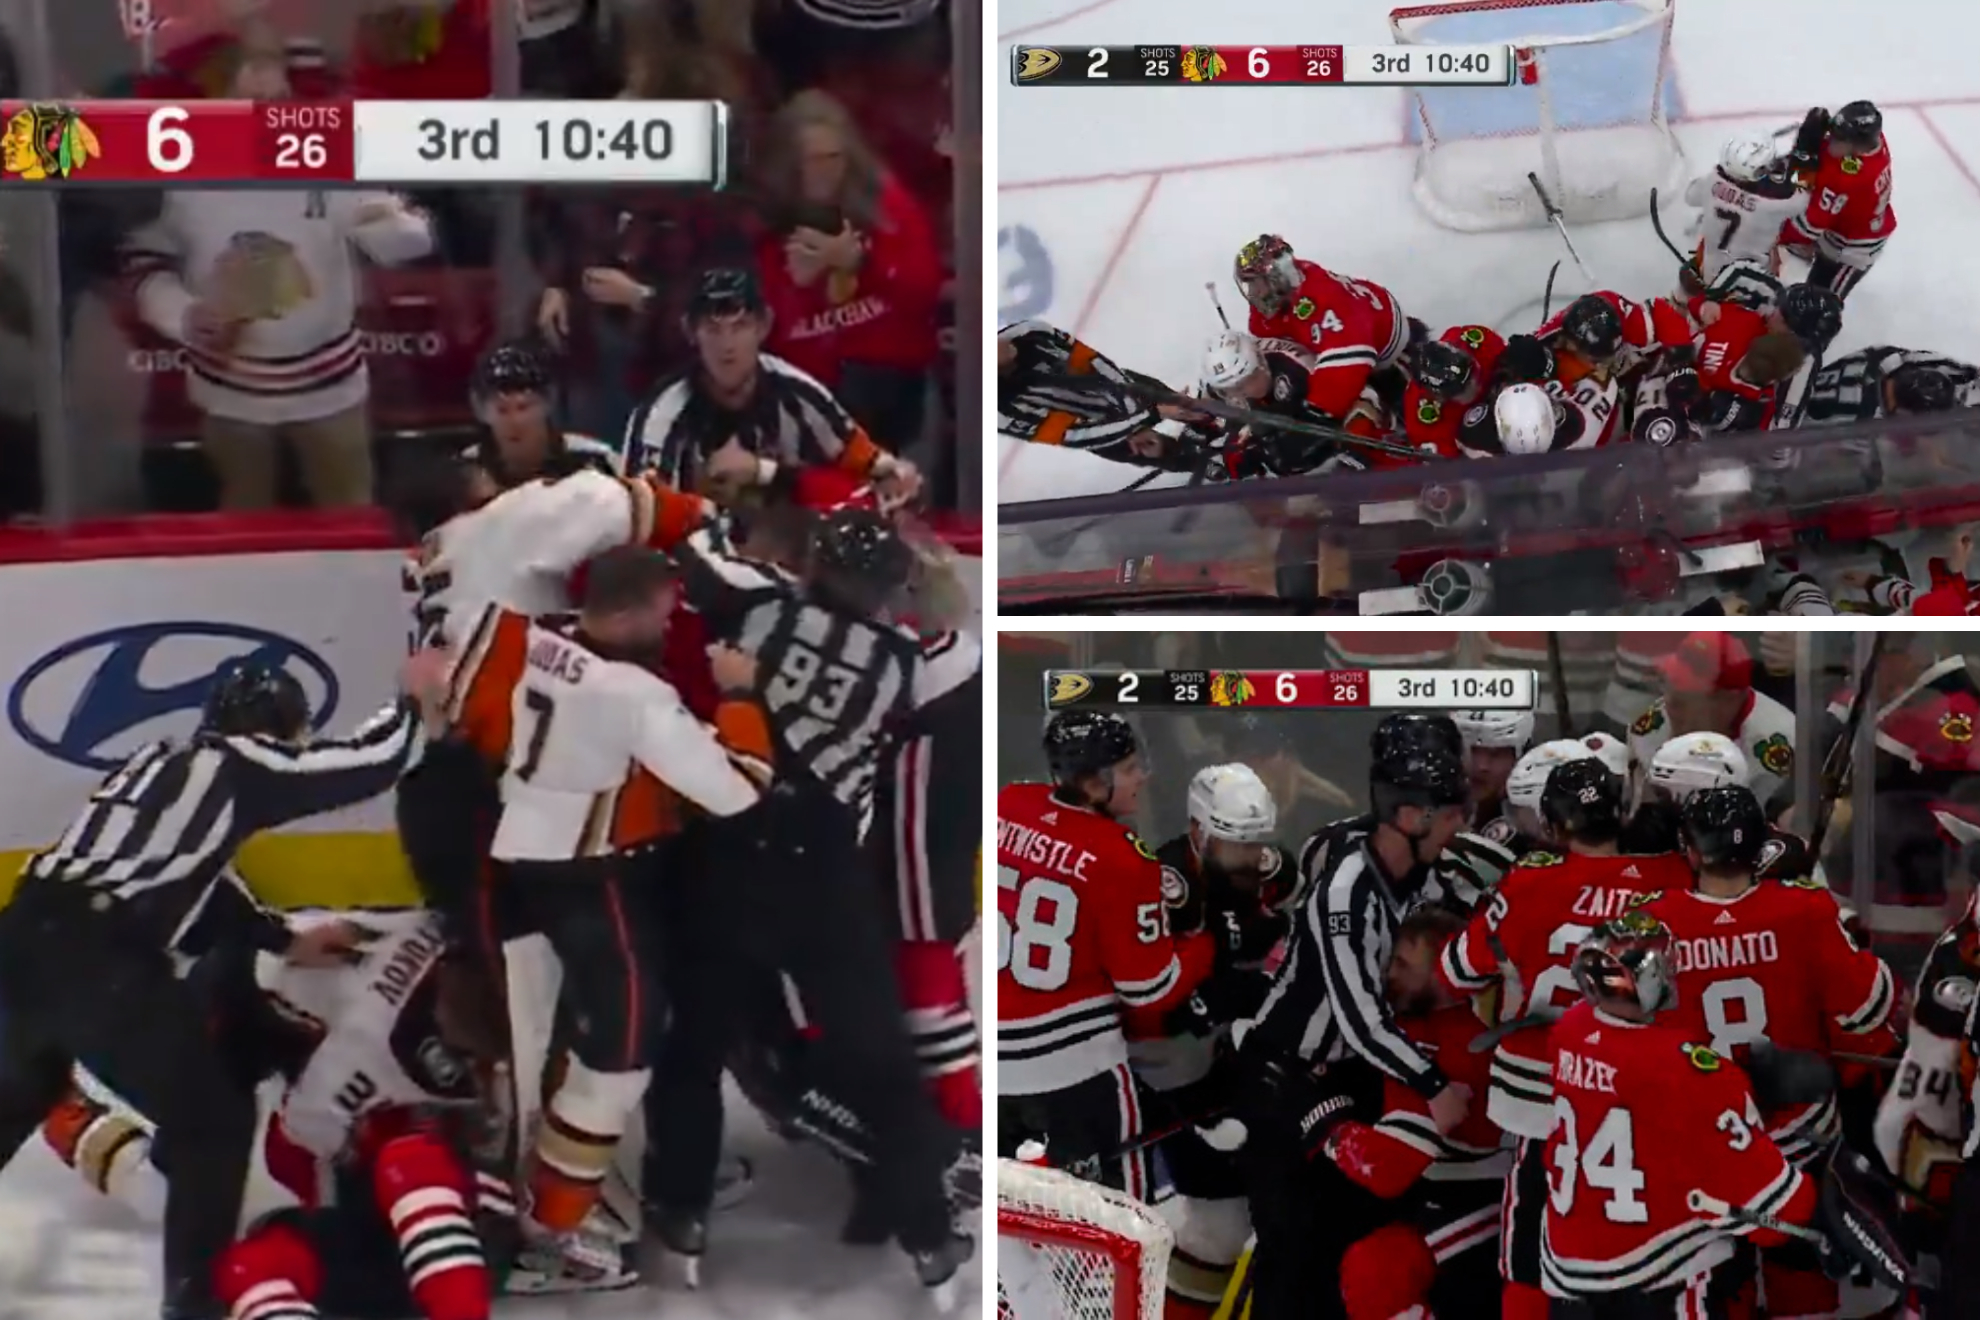 NHL fight of the year: the referees didnt even know where to start separating!